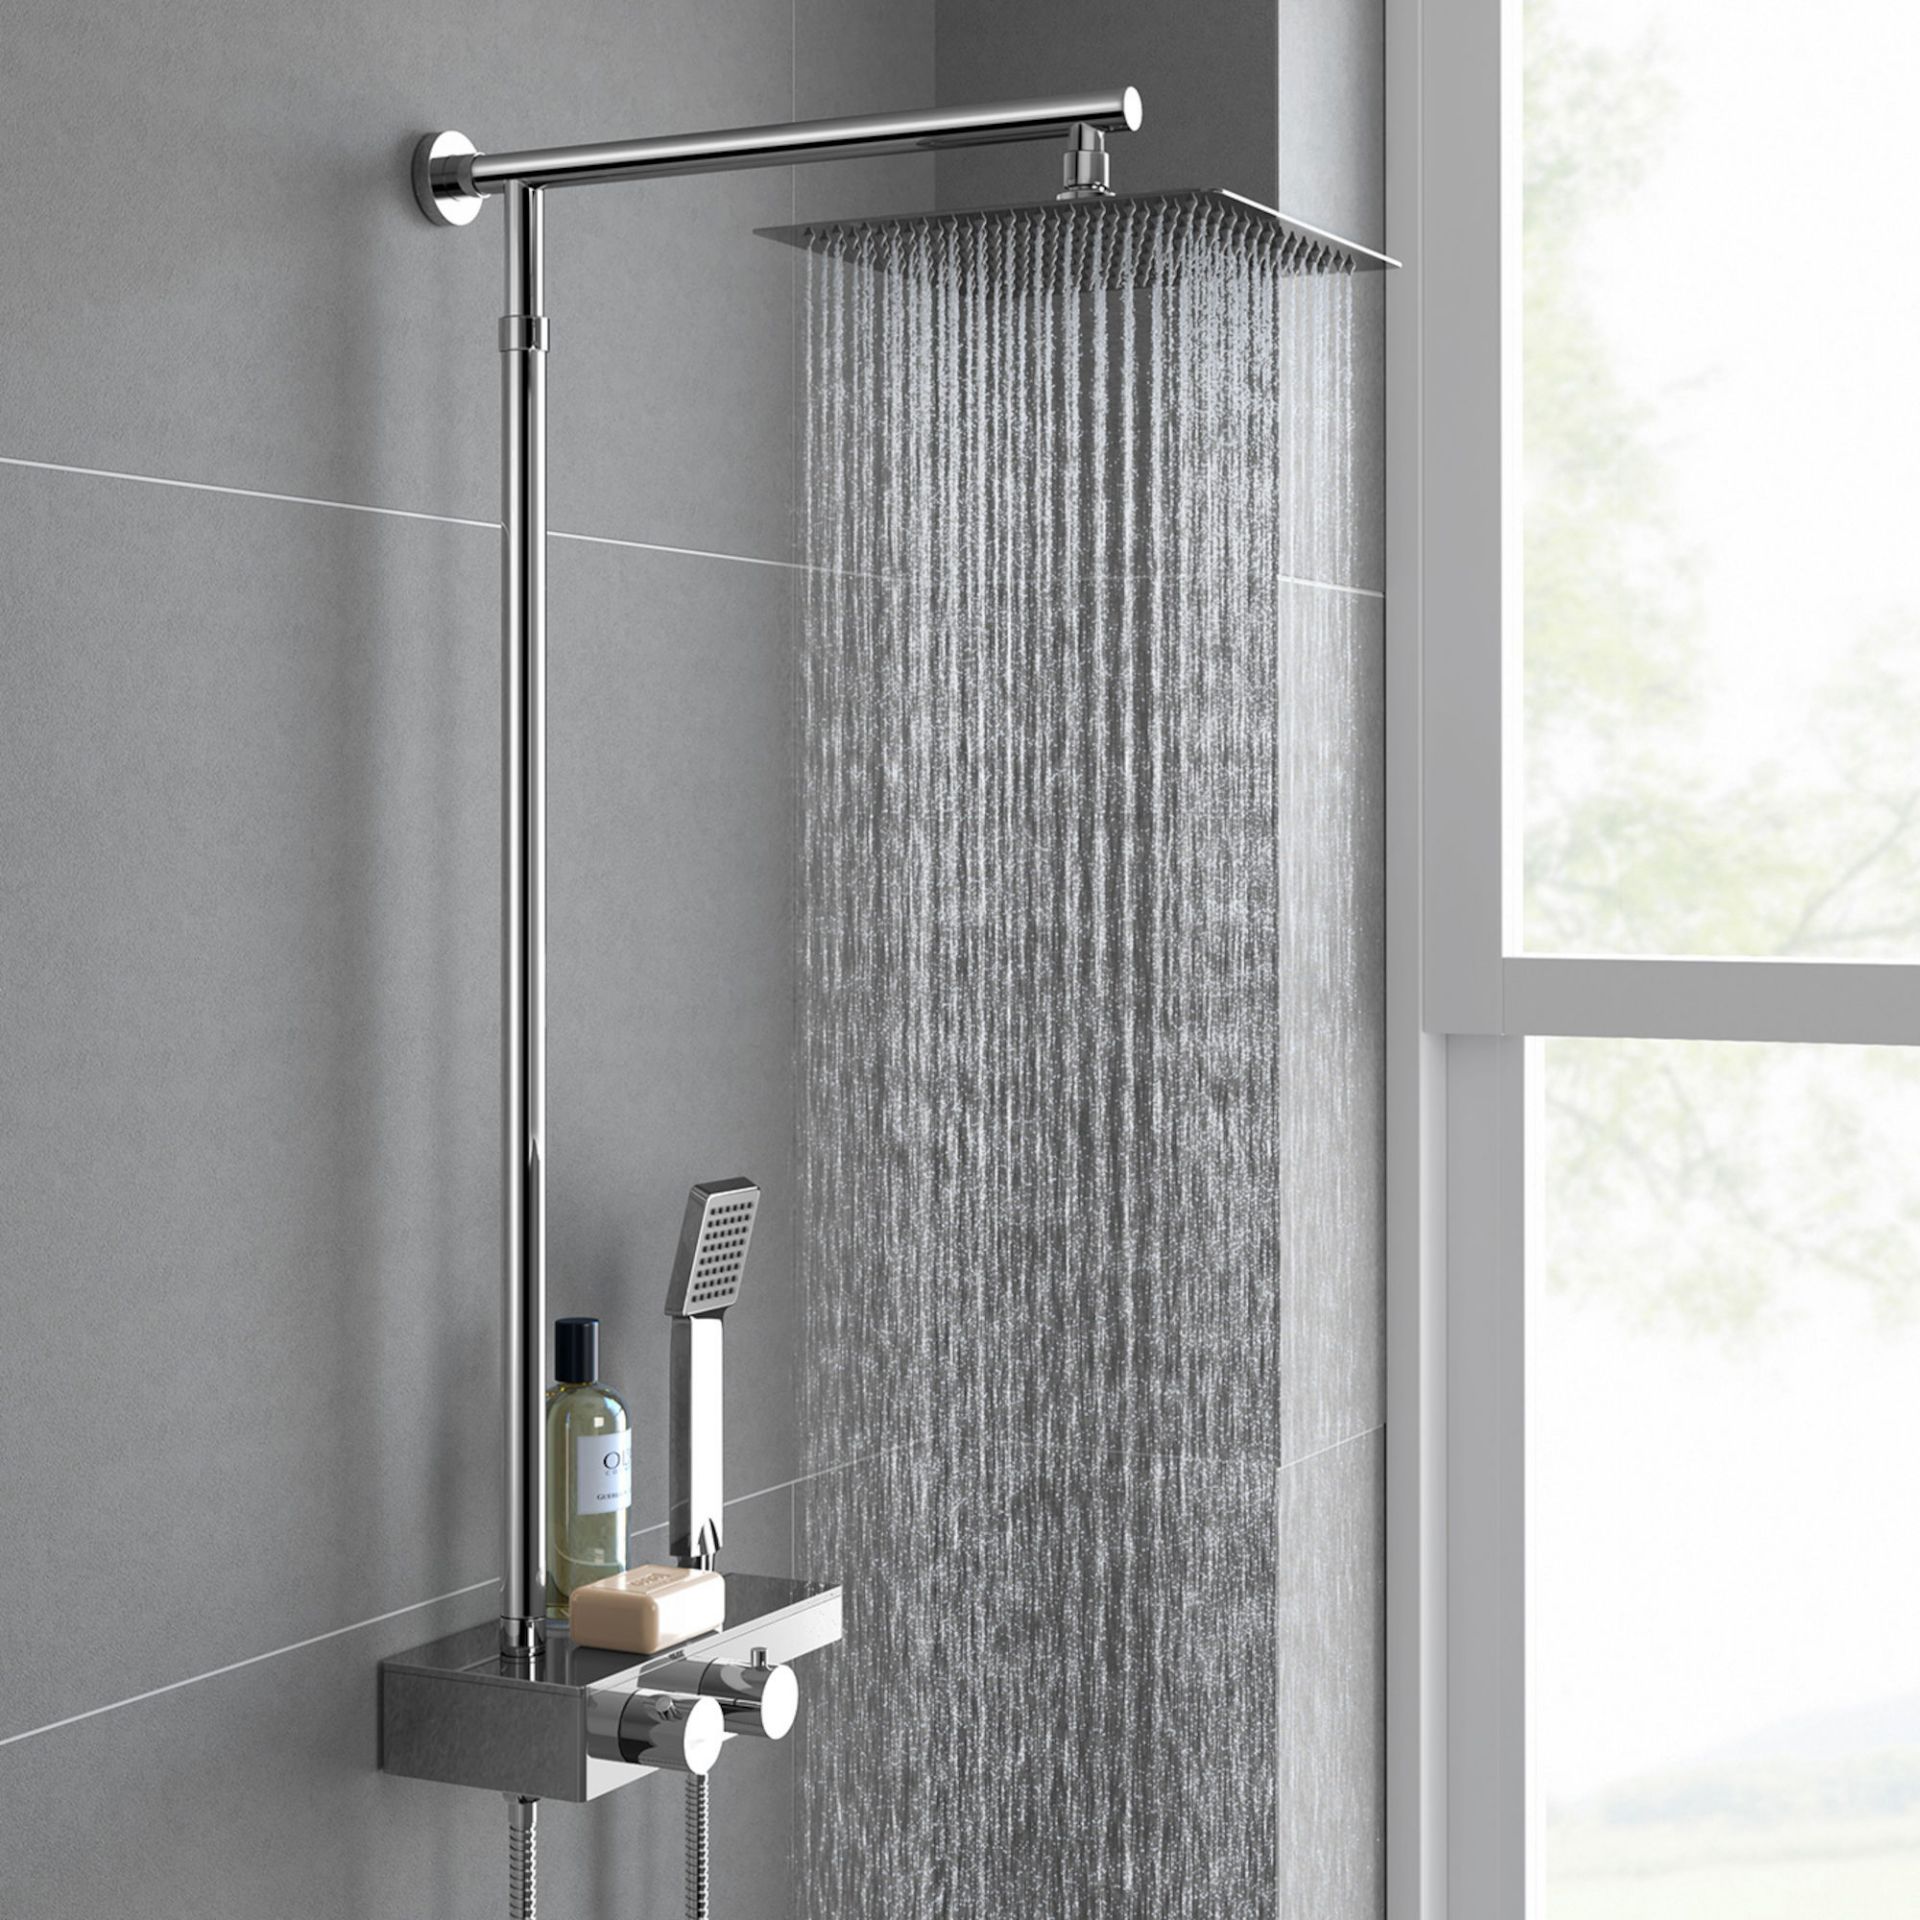 (AA121) Square Exposed Thermostatic Shower Shelf, Kit & Large Head. RRP £349.99. Style meets f...